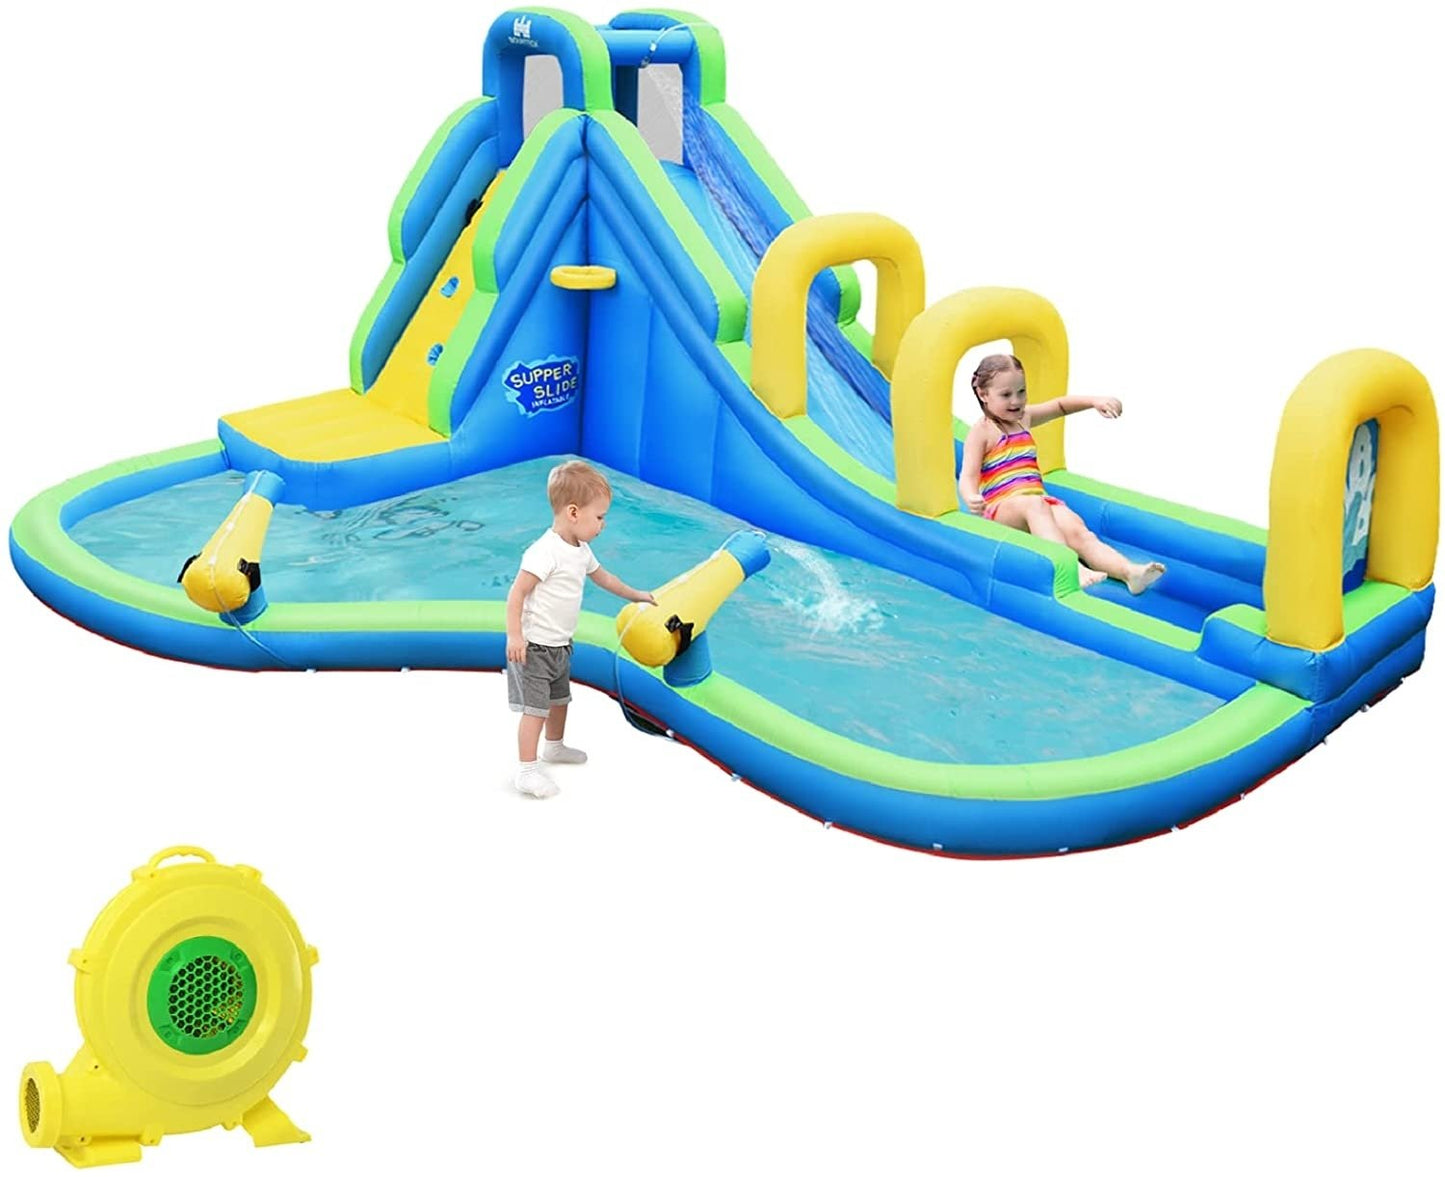 Multifunctional Inflatable Water Bounce with Blower, Blue